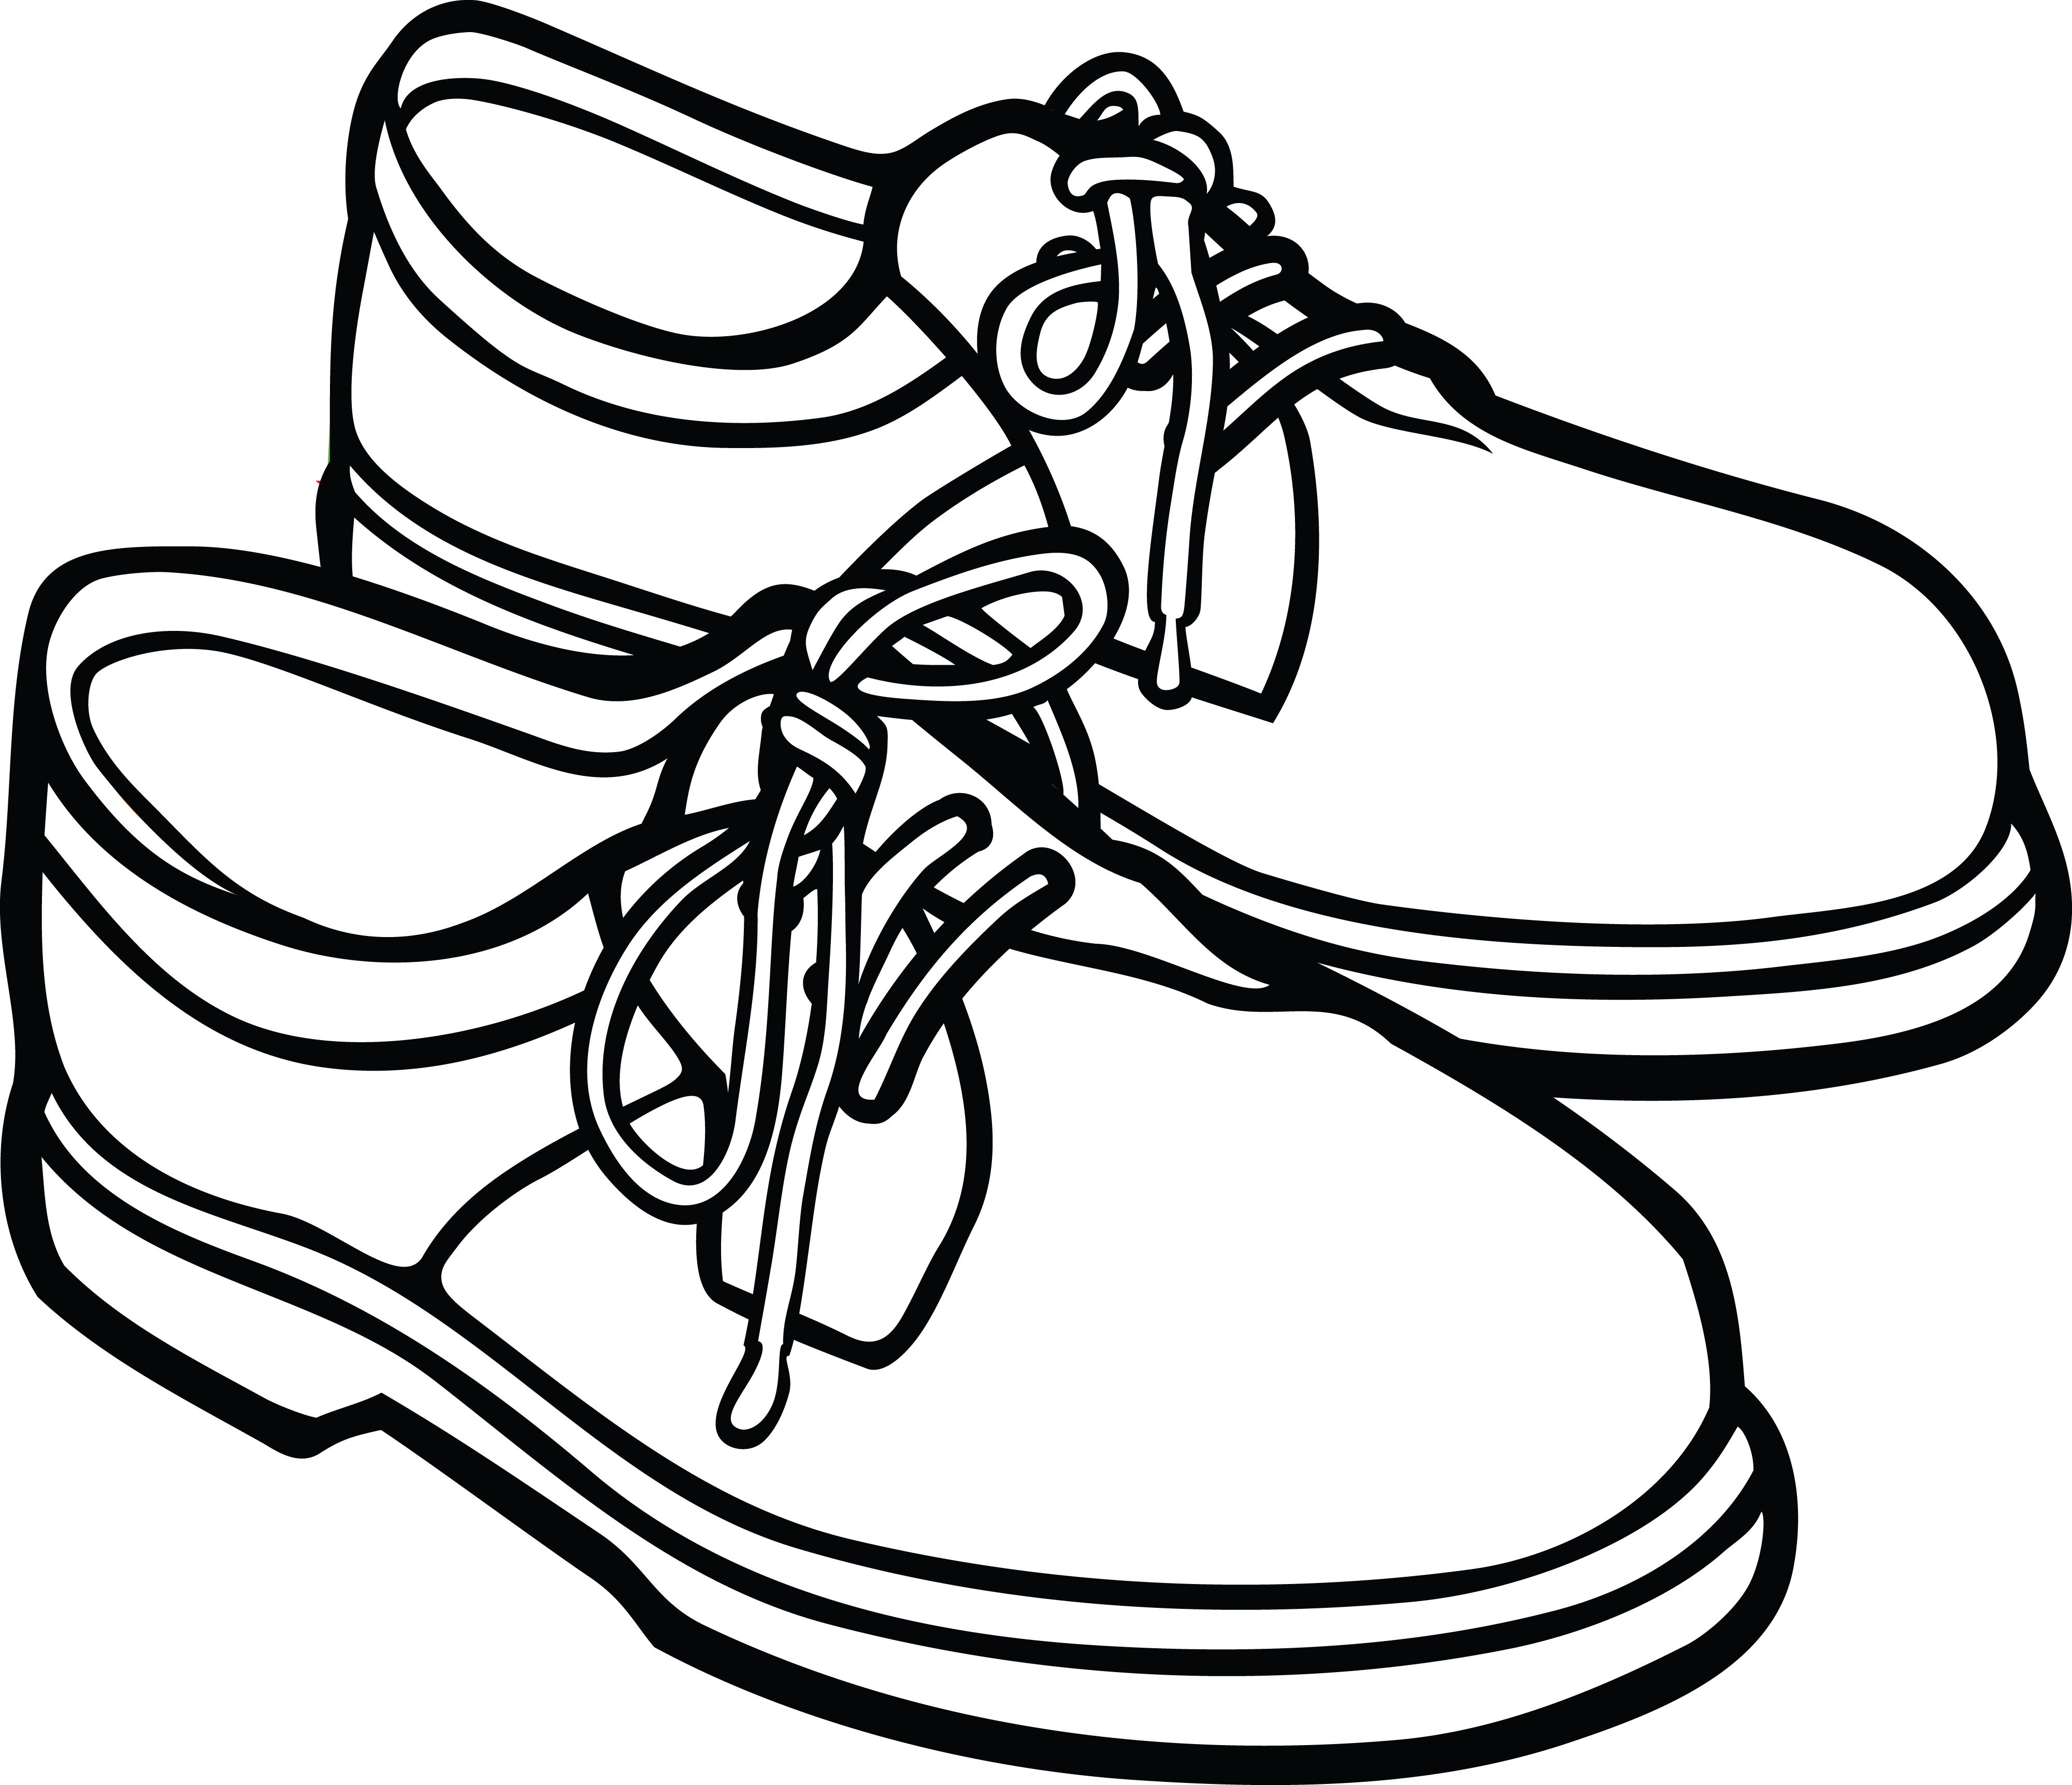 mens shoes clipart black and white